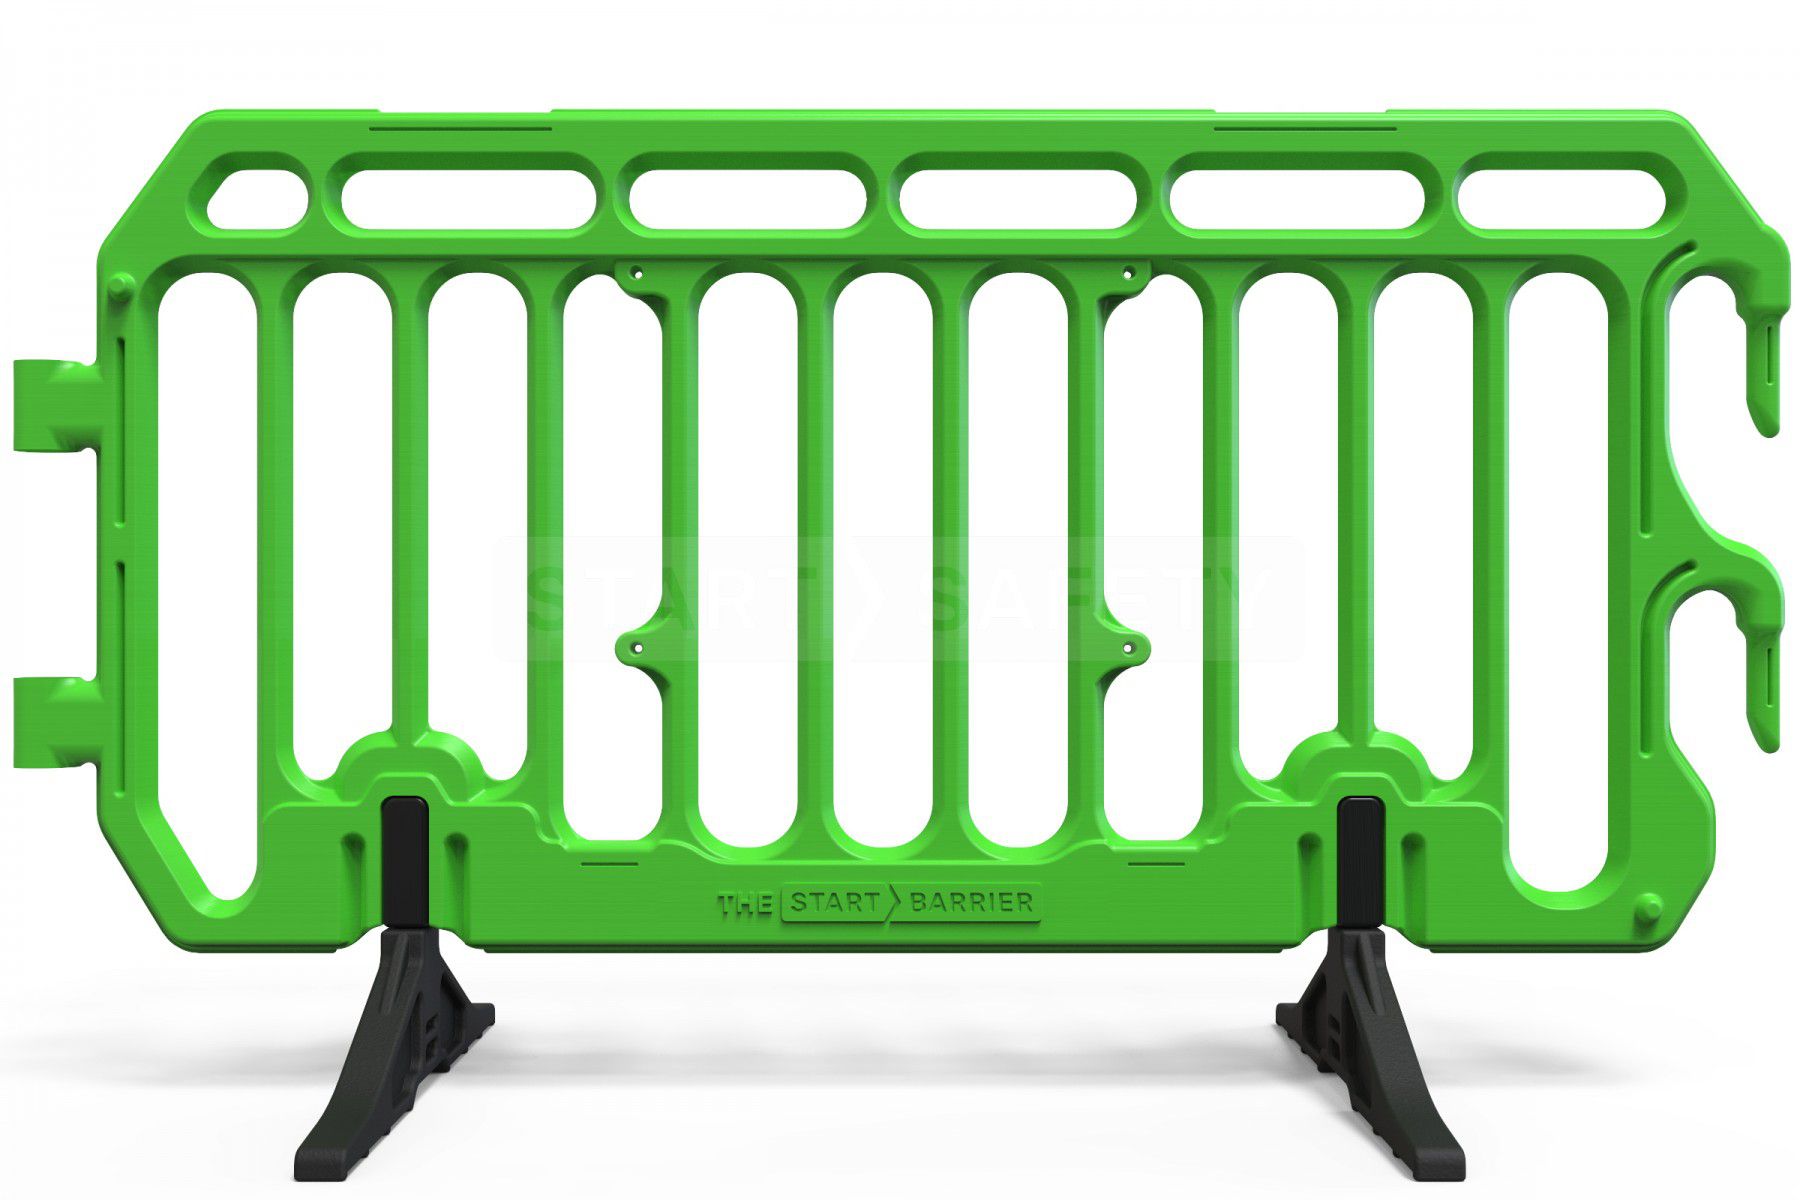 Plastic Crowd Control Barrier - The Start Barrier